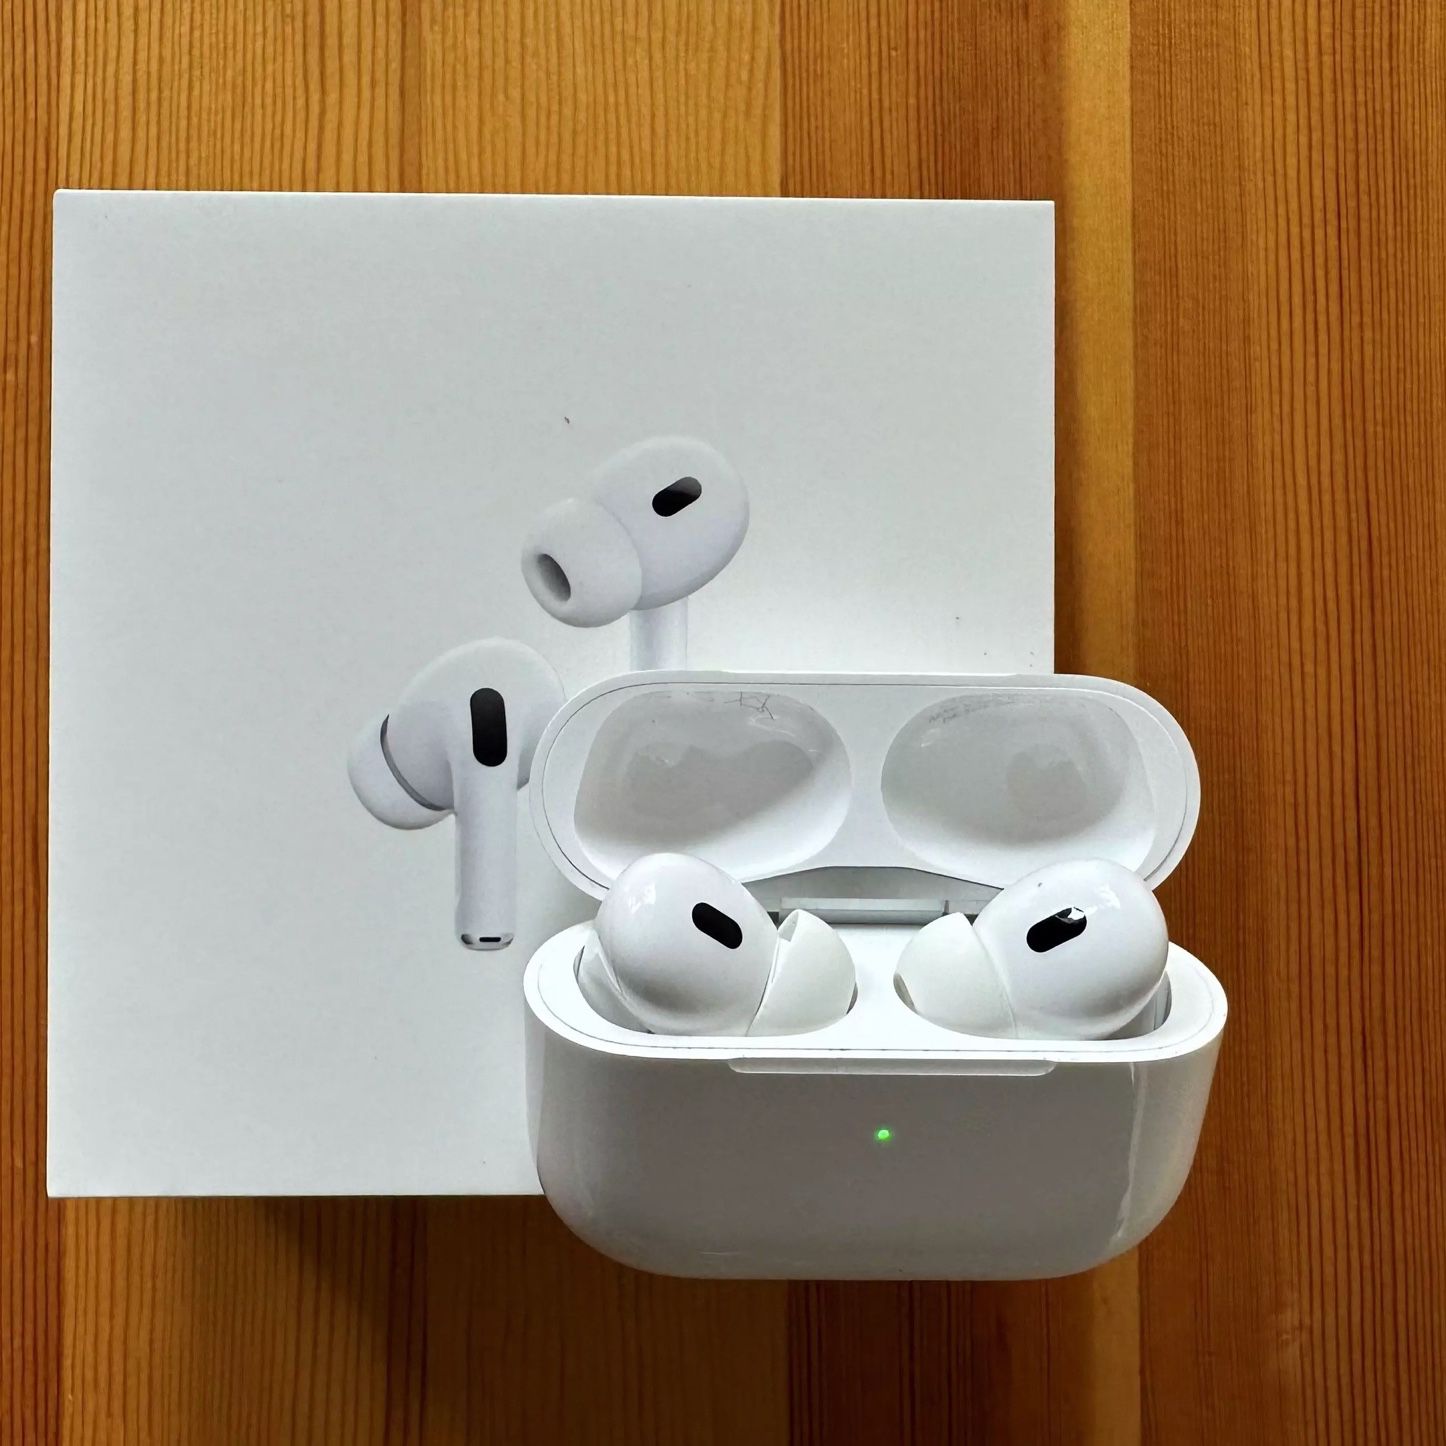 Airpods Pro 2 BRAND NEW (NEGOTIABLE)